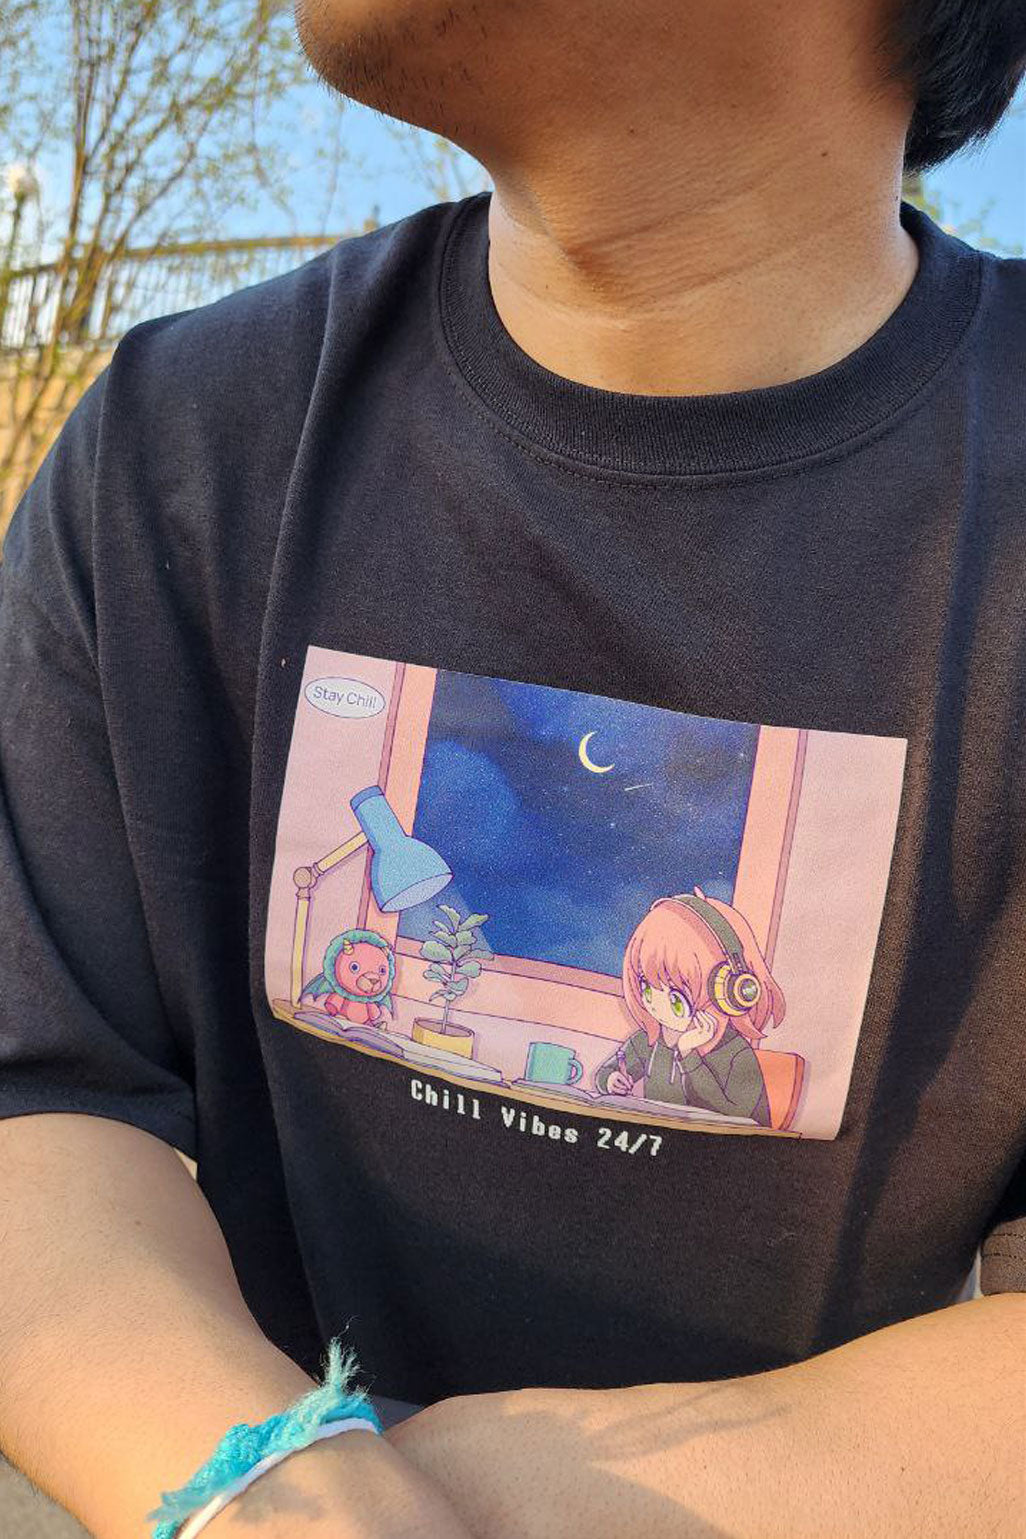 Chill Vibes 24/7 Tee